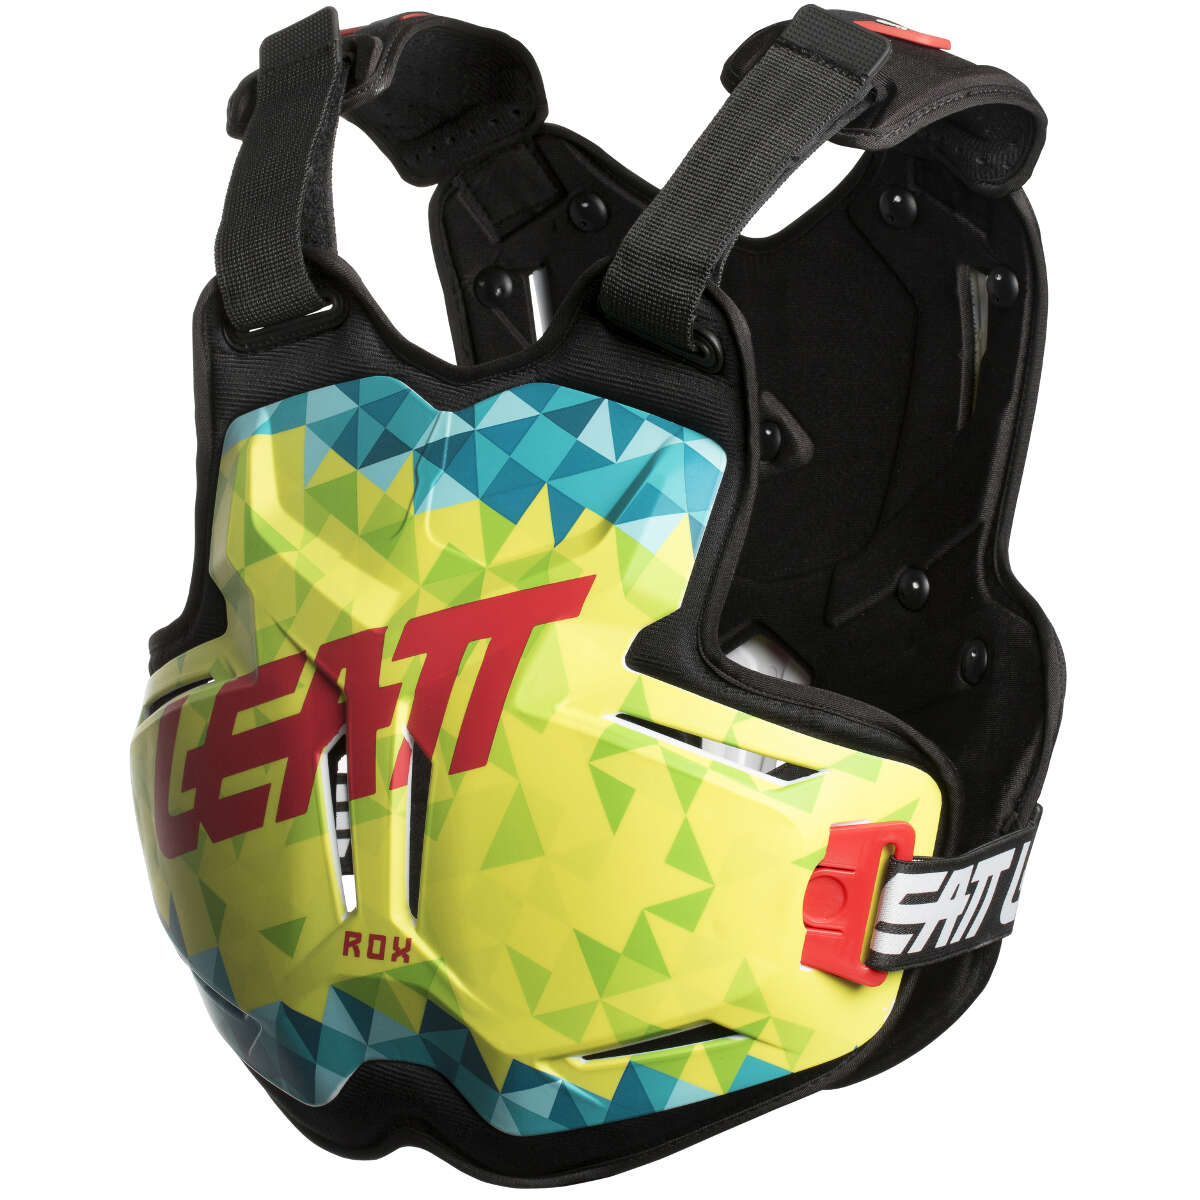 Leatt Chest Protector 2.5 ROX Lime/Teal